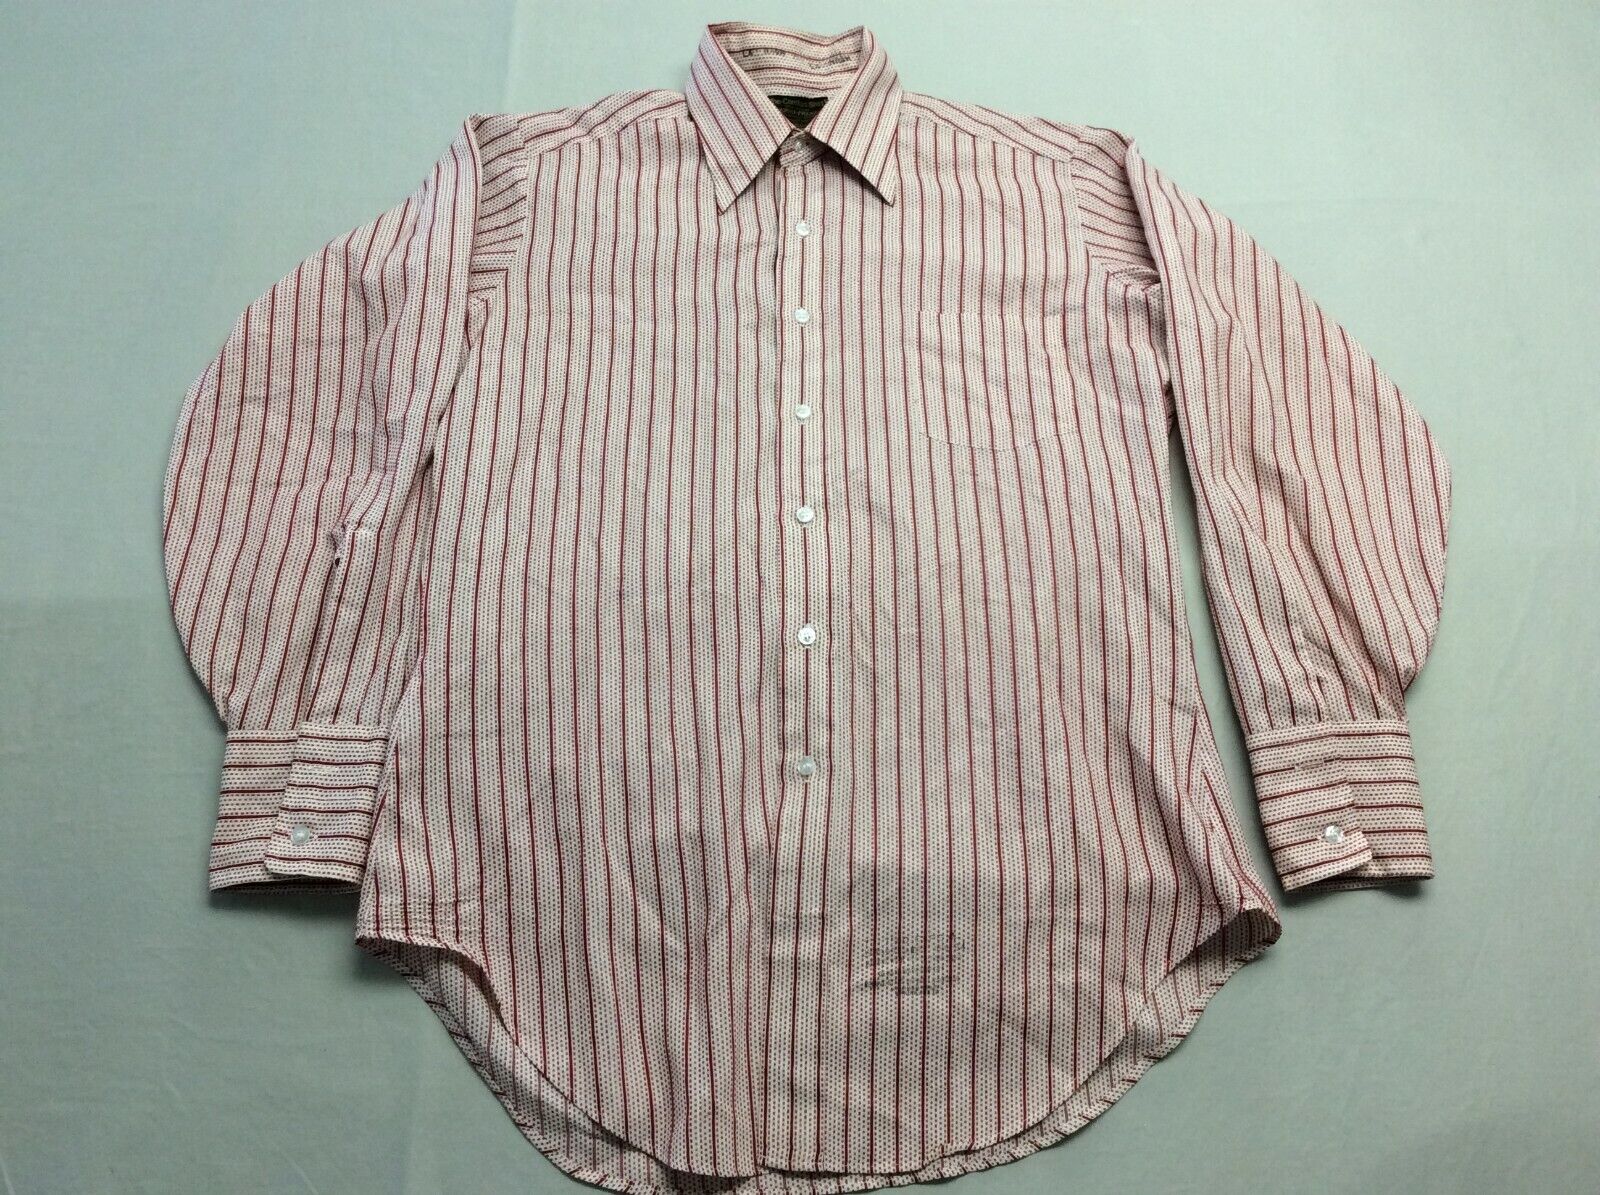 VINTAGE 60S 70S SEARS MENS STORE PERMA-PREST STRIPED RED DISCO SHIRT SIZE 15.5